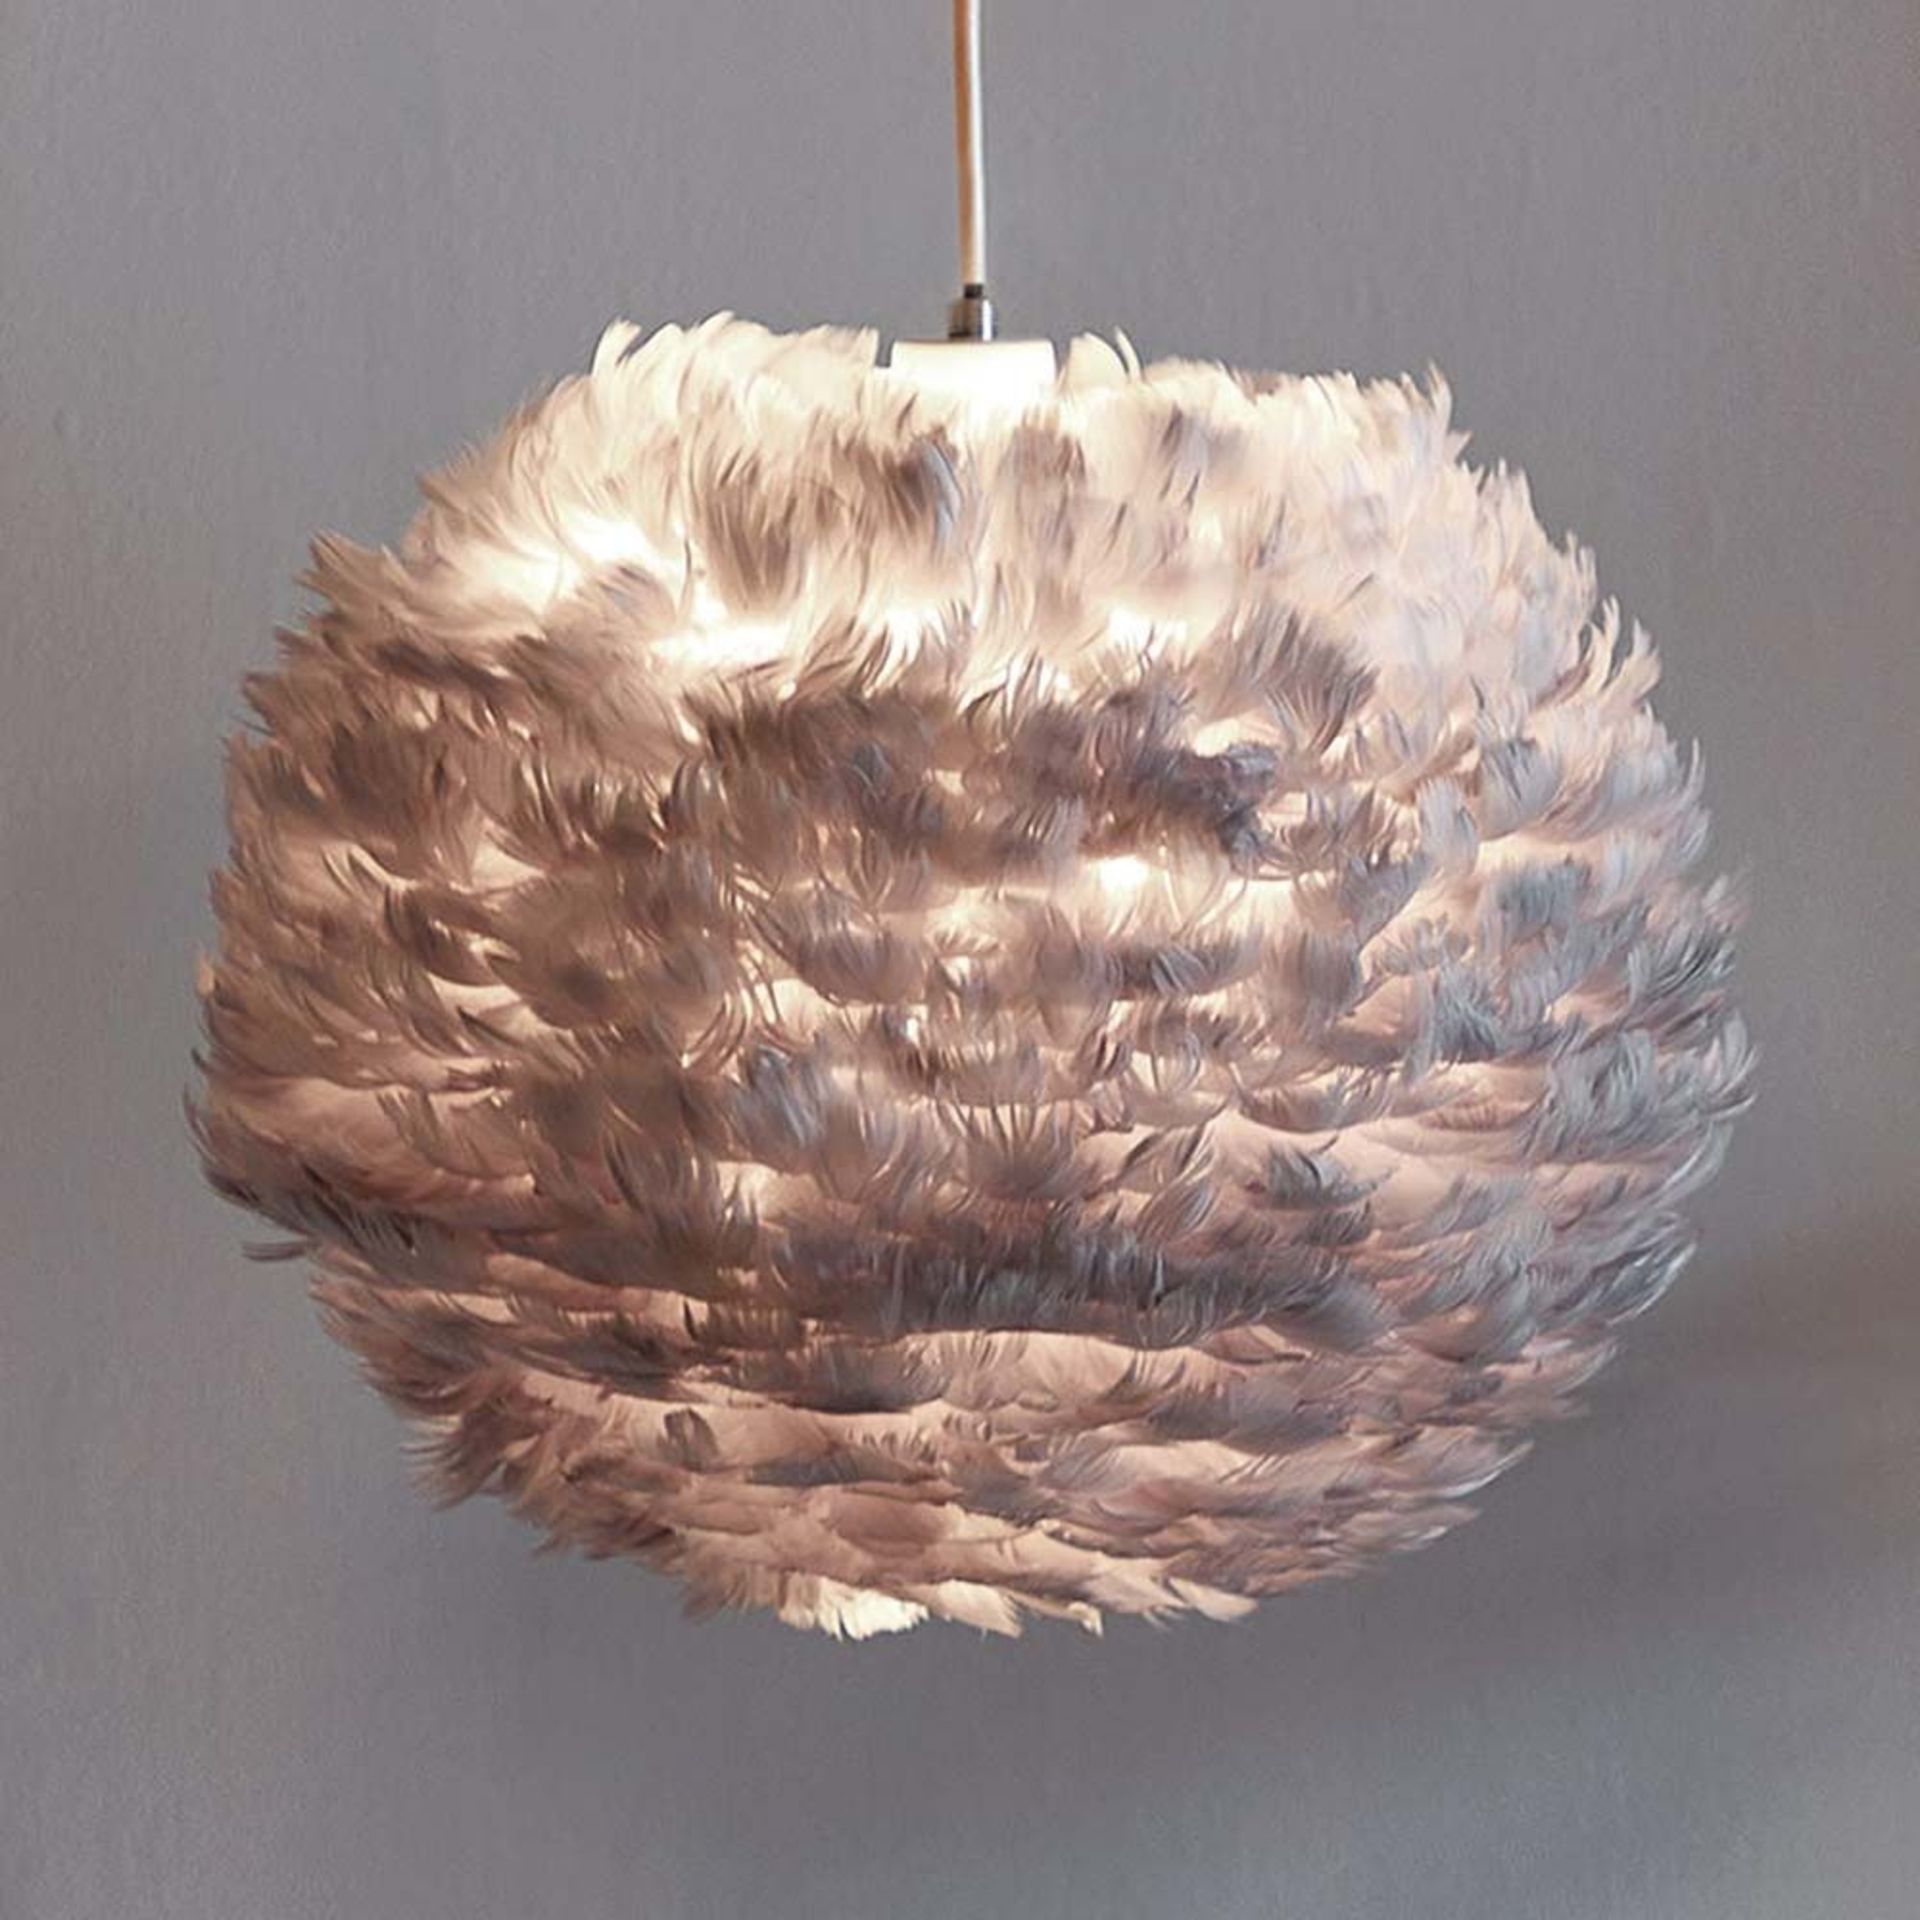 Grey Feather Ceiling Lamp Shade. This ceiling shade is a sure-fire way to make an impact. It’ll look